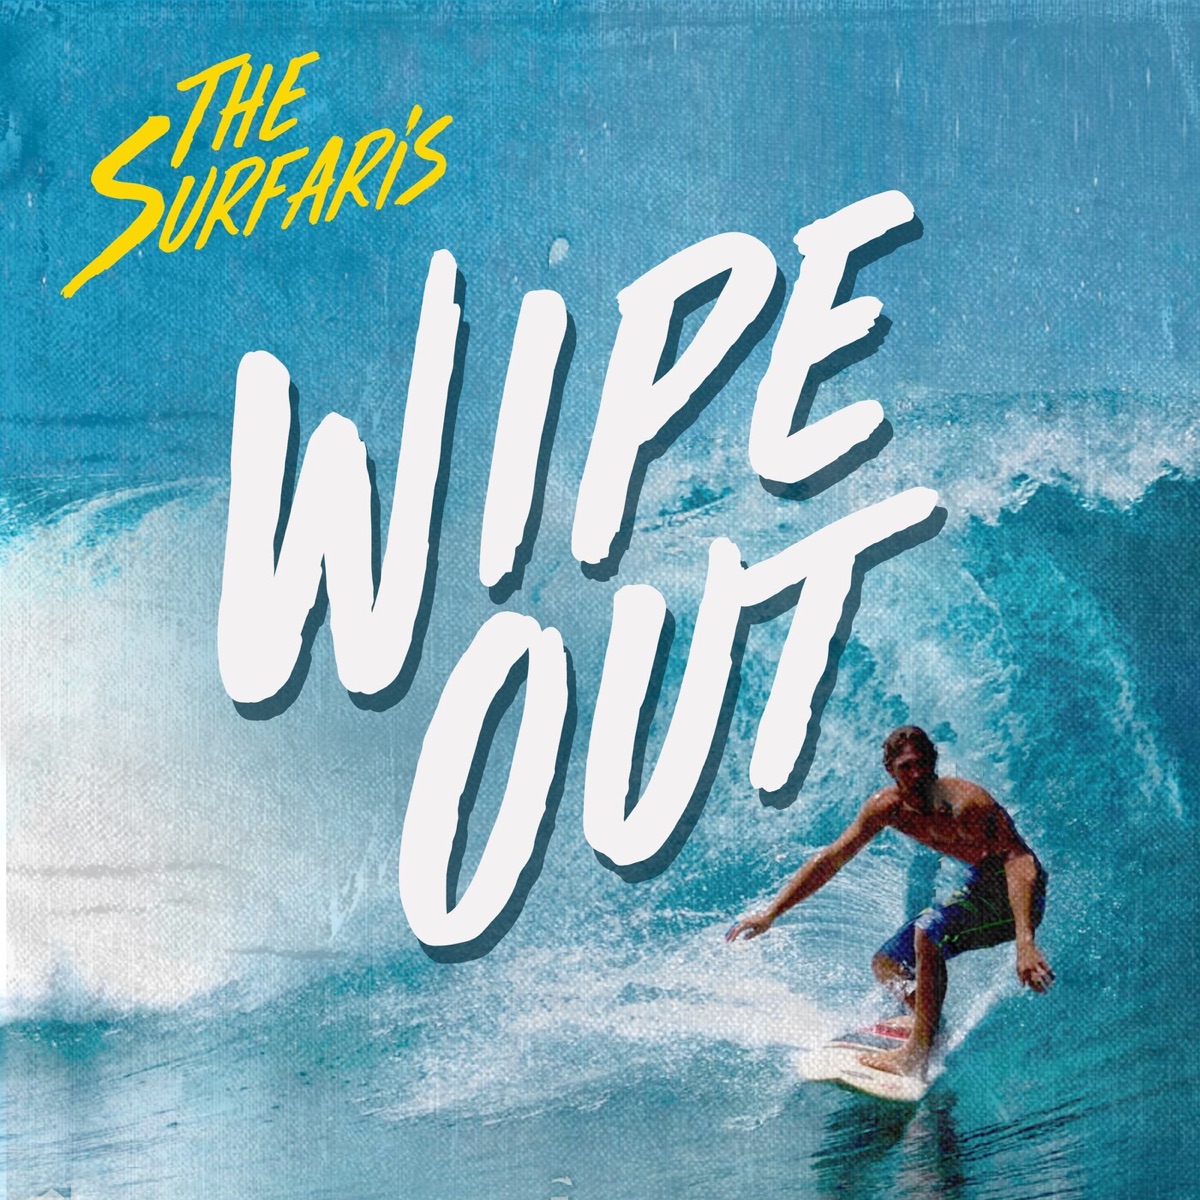 Wipe Out - Album by The Surfaris - Apple Music